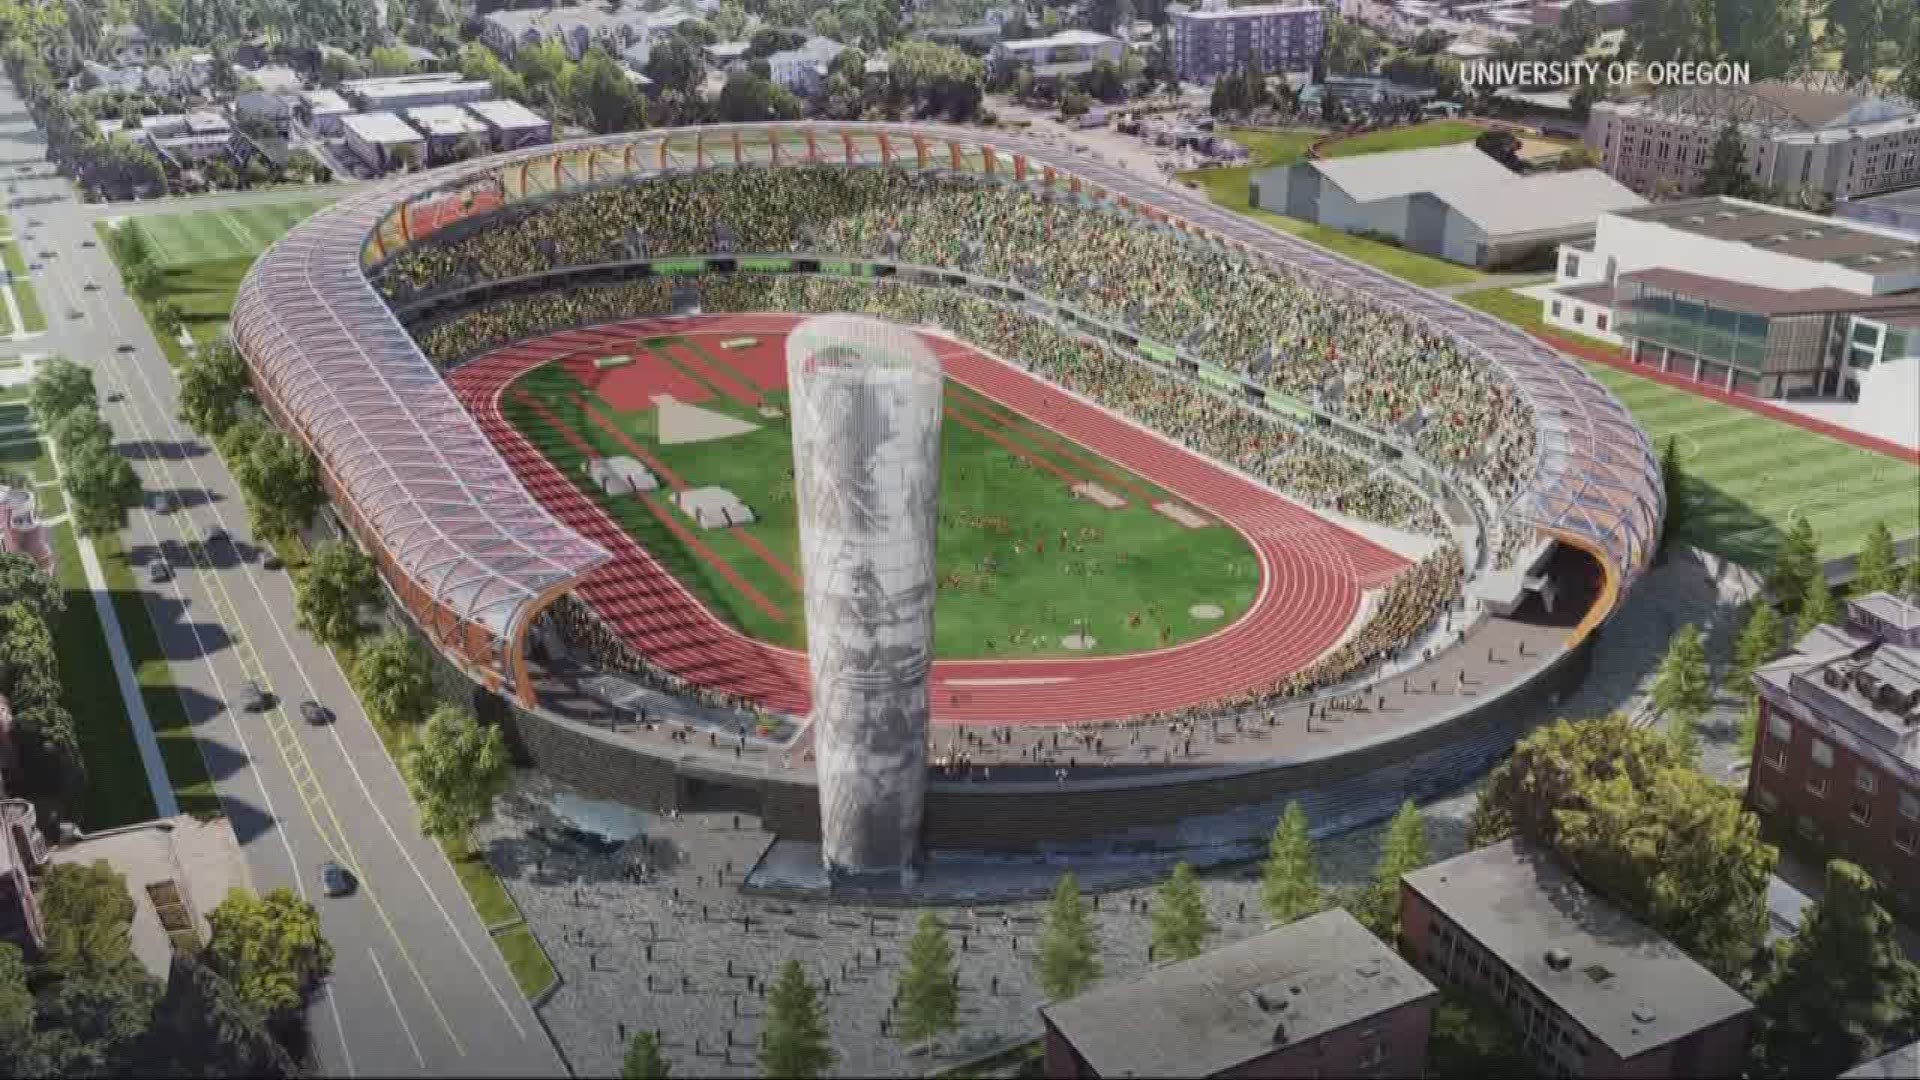 The redesigned track stadium will be finished in 2020.